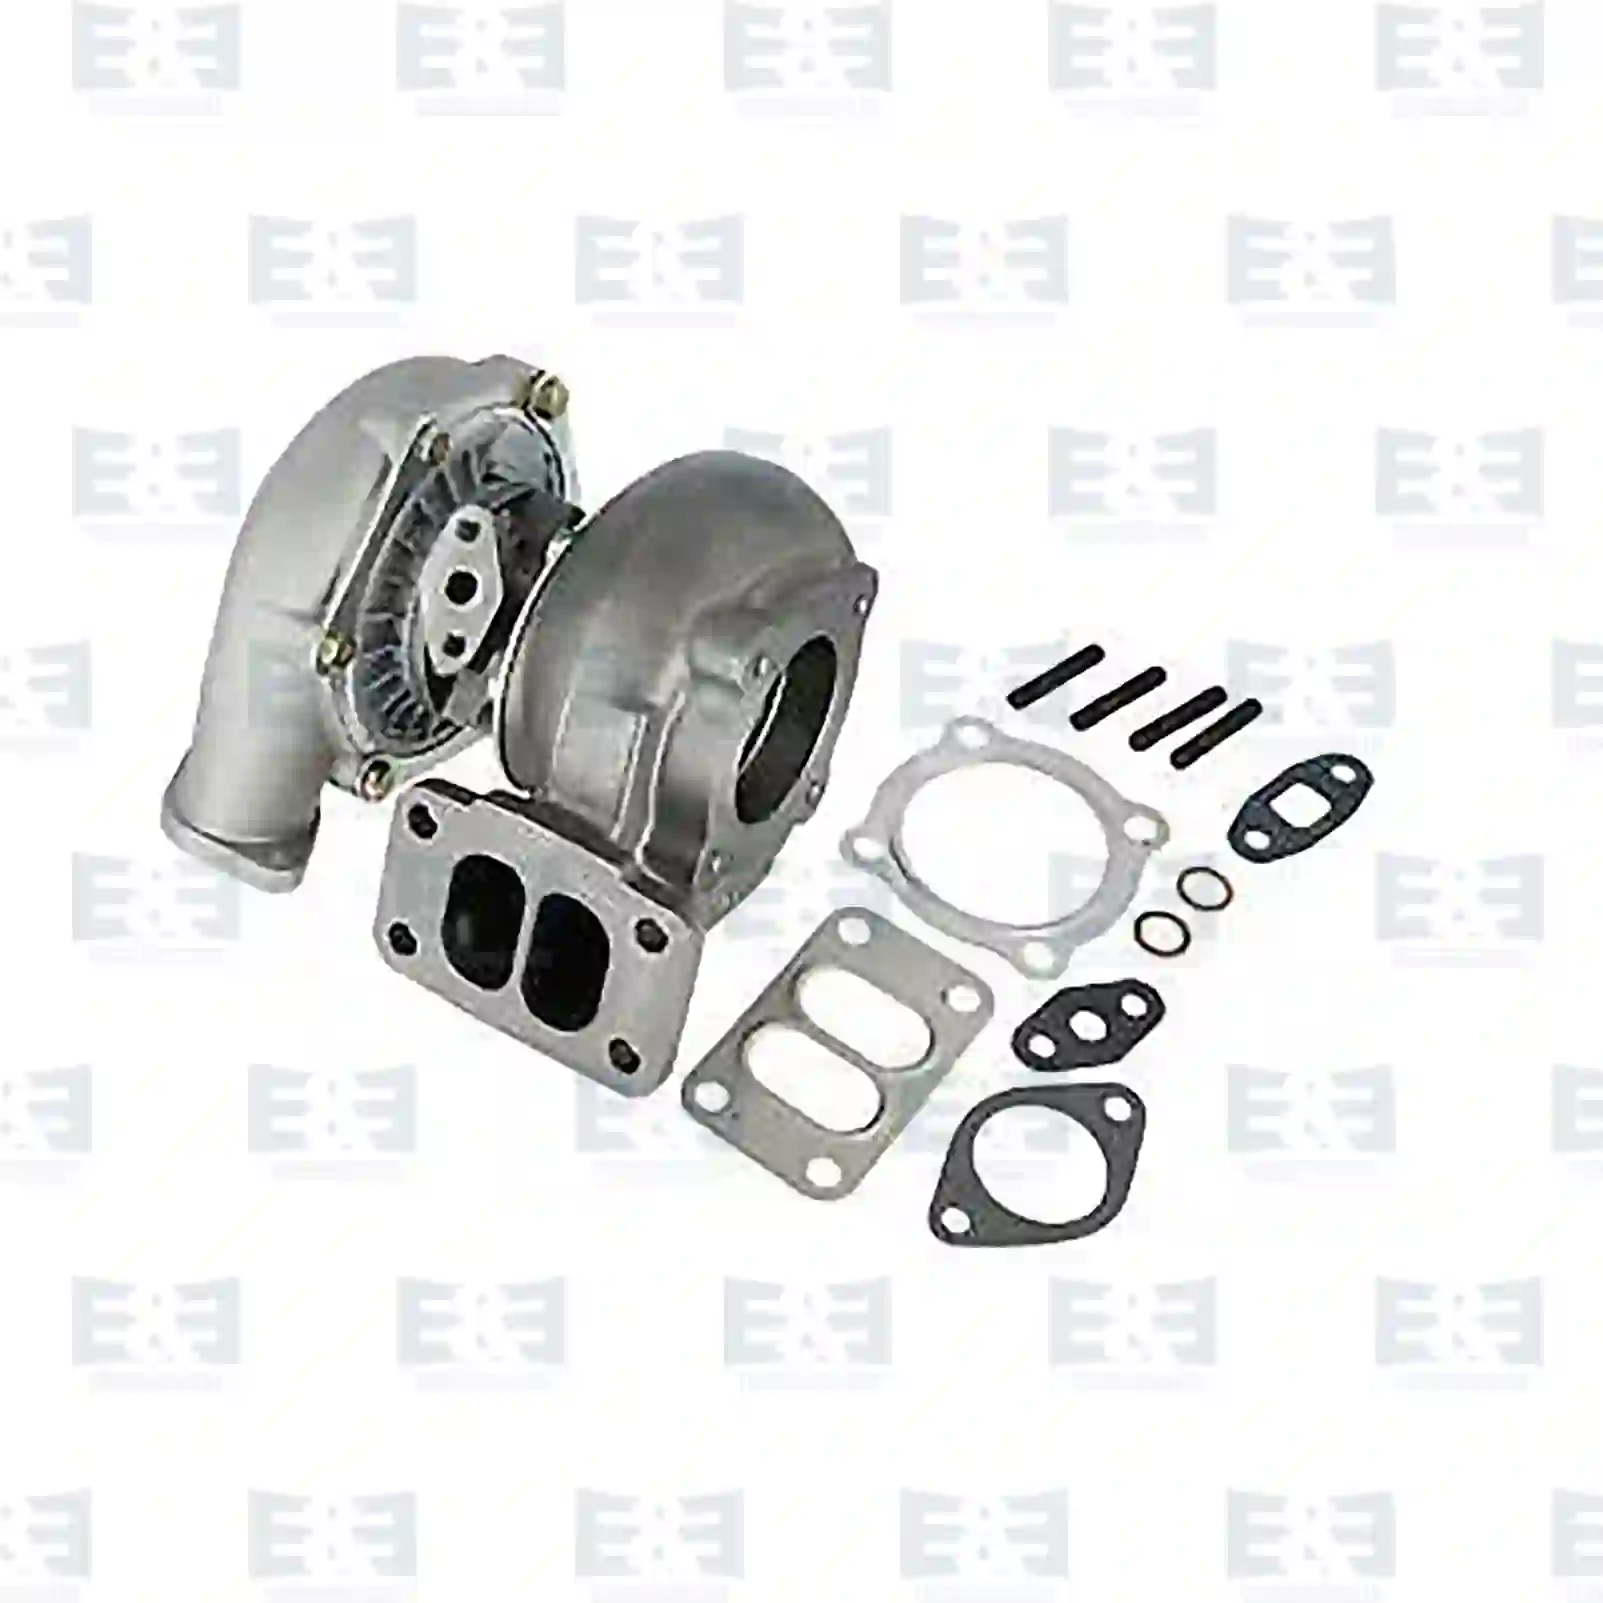 Turbocharger Turbocharger, with gasket kit, EE No 2E2200993 ,  oem no:3251119699, 3520961599, 3520961699, 3520962199, 3520962399, 3520962599, 3520962699, 3520962799, 3520962999, 3520963099, 3520963199, 3520963299, 3520963399, 3520963499, 3520963599, 3520963699, 3520963799, 3520964499, 3520964599, 3520964699, 3520964799, 3520965499, 3520965599, 3520965699, 3520965799, 3520965899, 3520965999, 3520966099, 3520966199, 3520967199, 352096719980, 3520967299, 3520967399, 3520967499, 3520967799, 3521123599, 3521209599, 3521209699, 3521215799, 3521215899, 3520962526, 3520962527, 3520962529, 3520962530 E&E Truck Spare Parts | Truck Spare Parts, Auotomotive Spare Parts